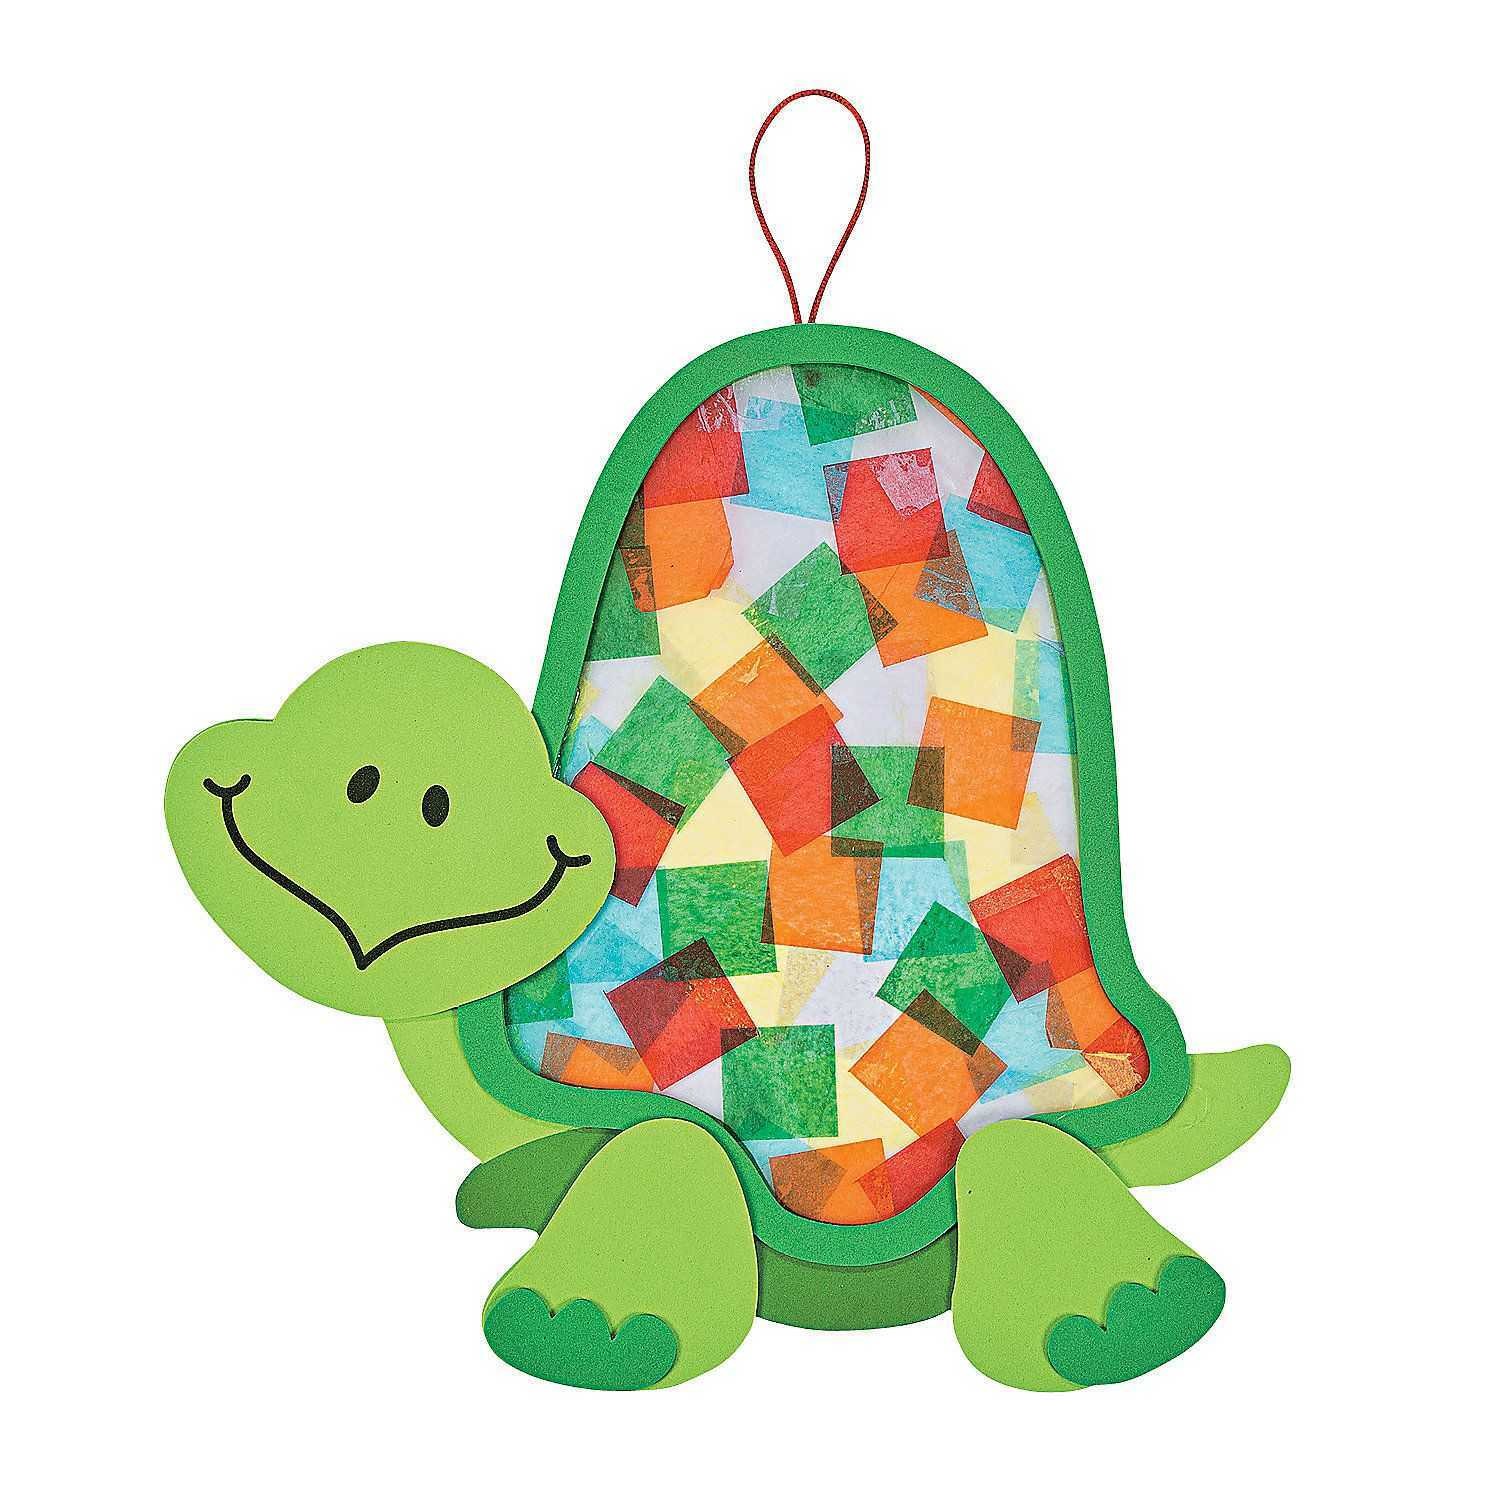 Papercraft Turtle Paper Handicraft for Kids Beautiful Colorful Turtle Tissue Paper